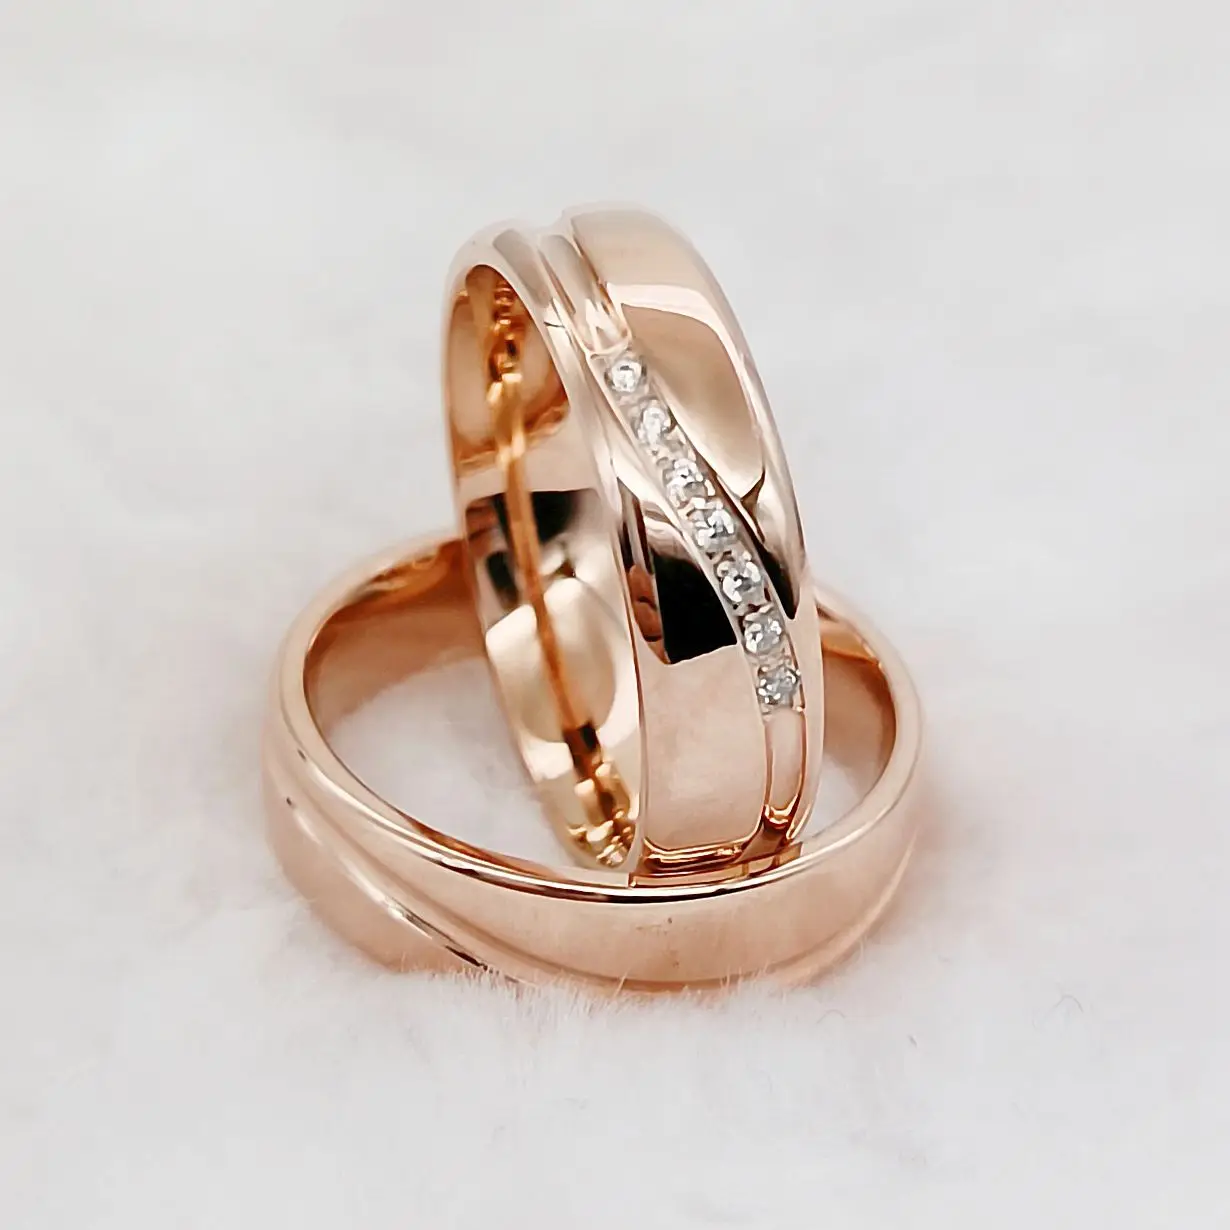 Buy Personalized Rose Gold & Silver Ring Set Custom Engraved Ring Couple  Ring Set His Hers Ring Wedding Band Two Tone Promise Ring Comfort Fit  Online in India - Etsy